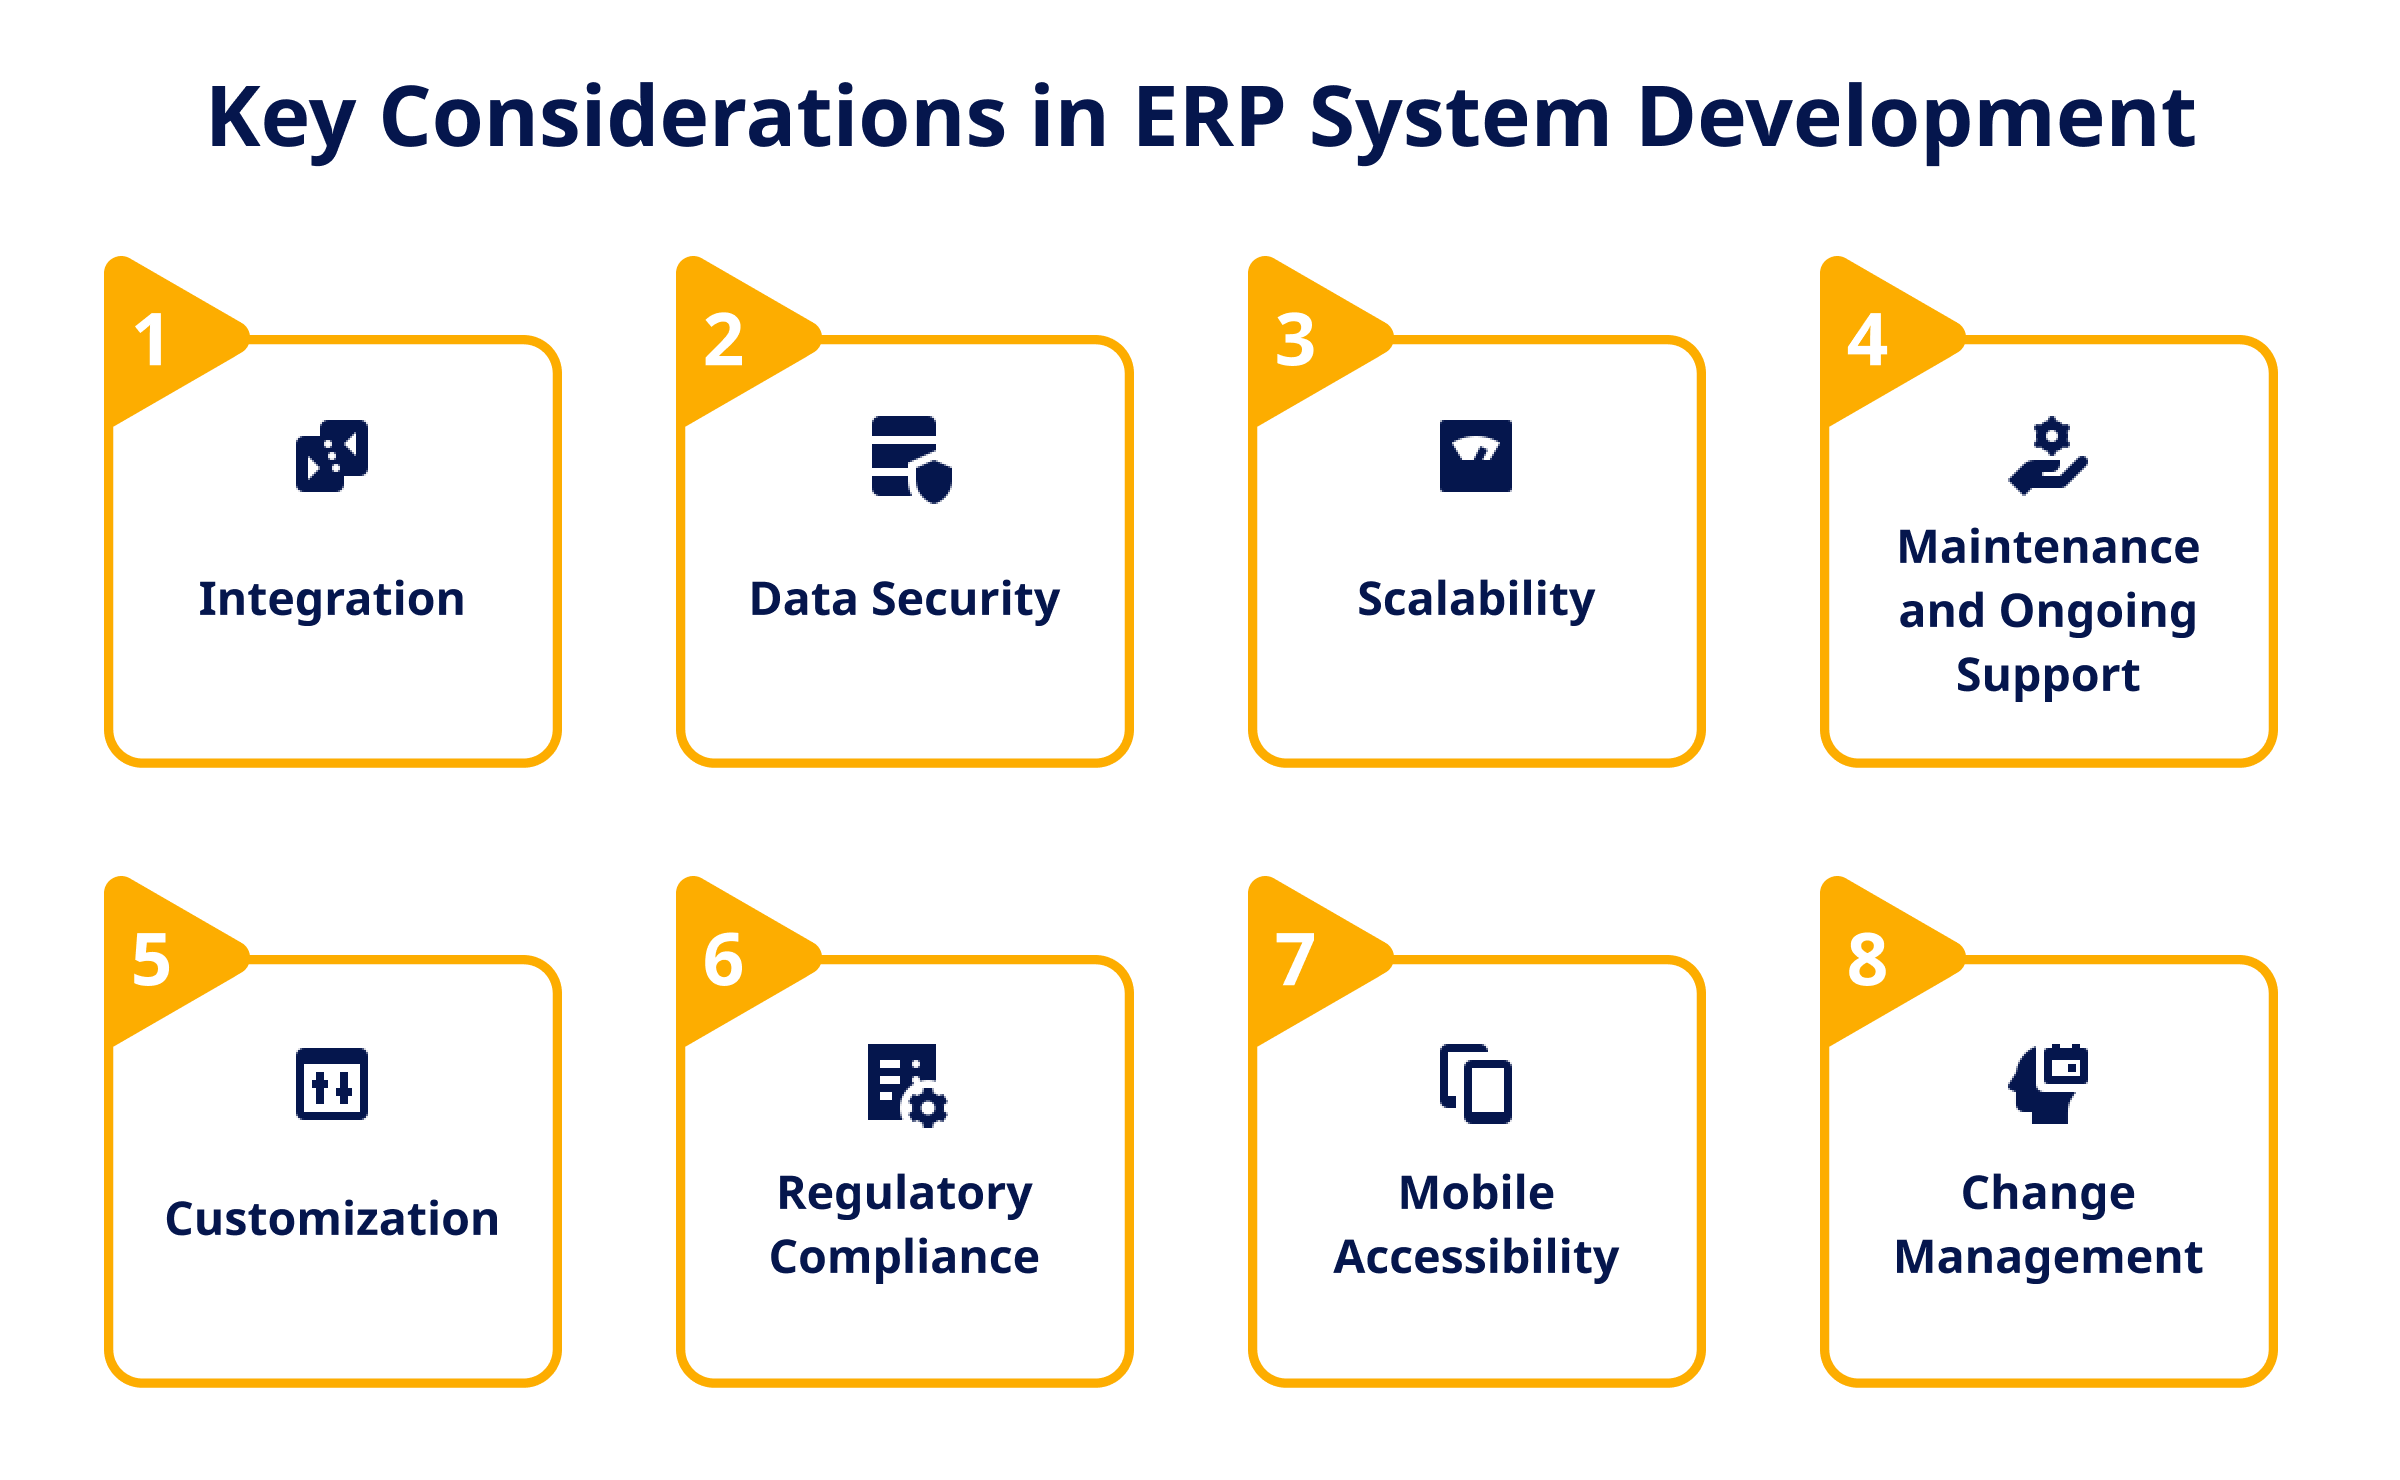 Key Considerations in ERP System Development